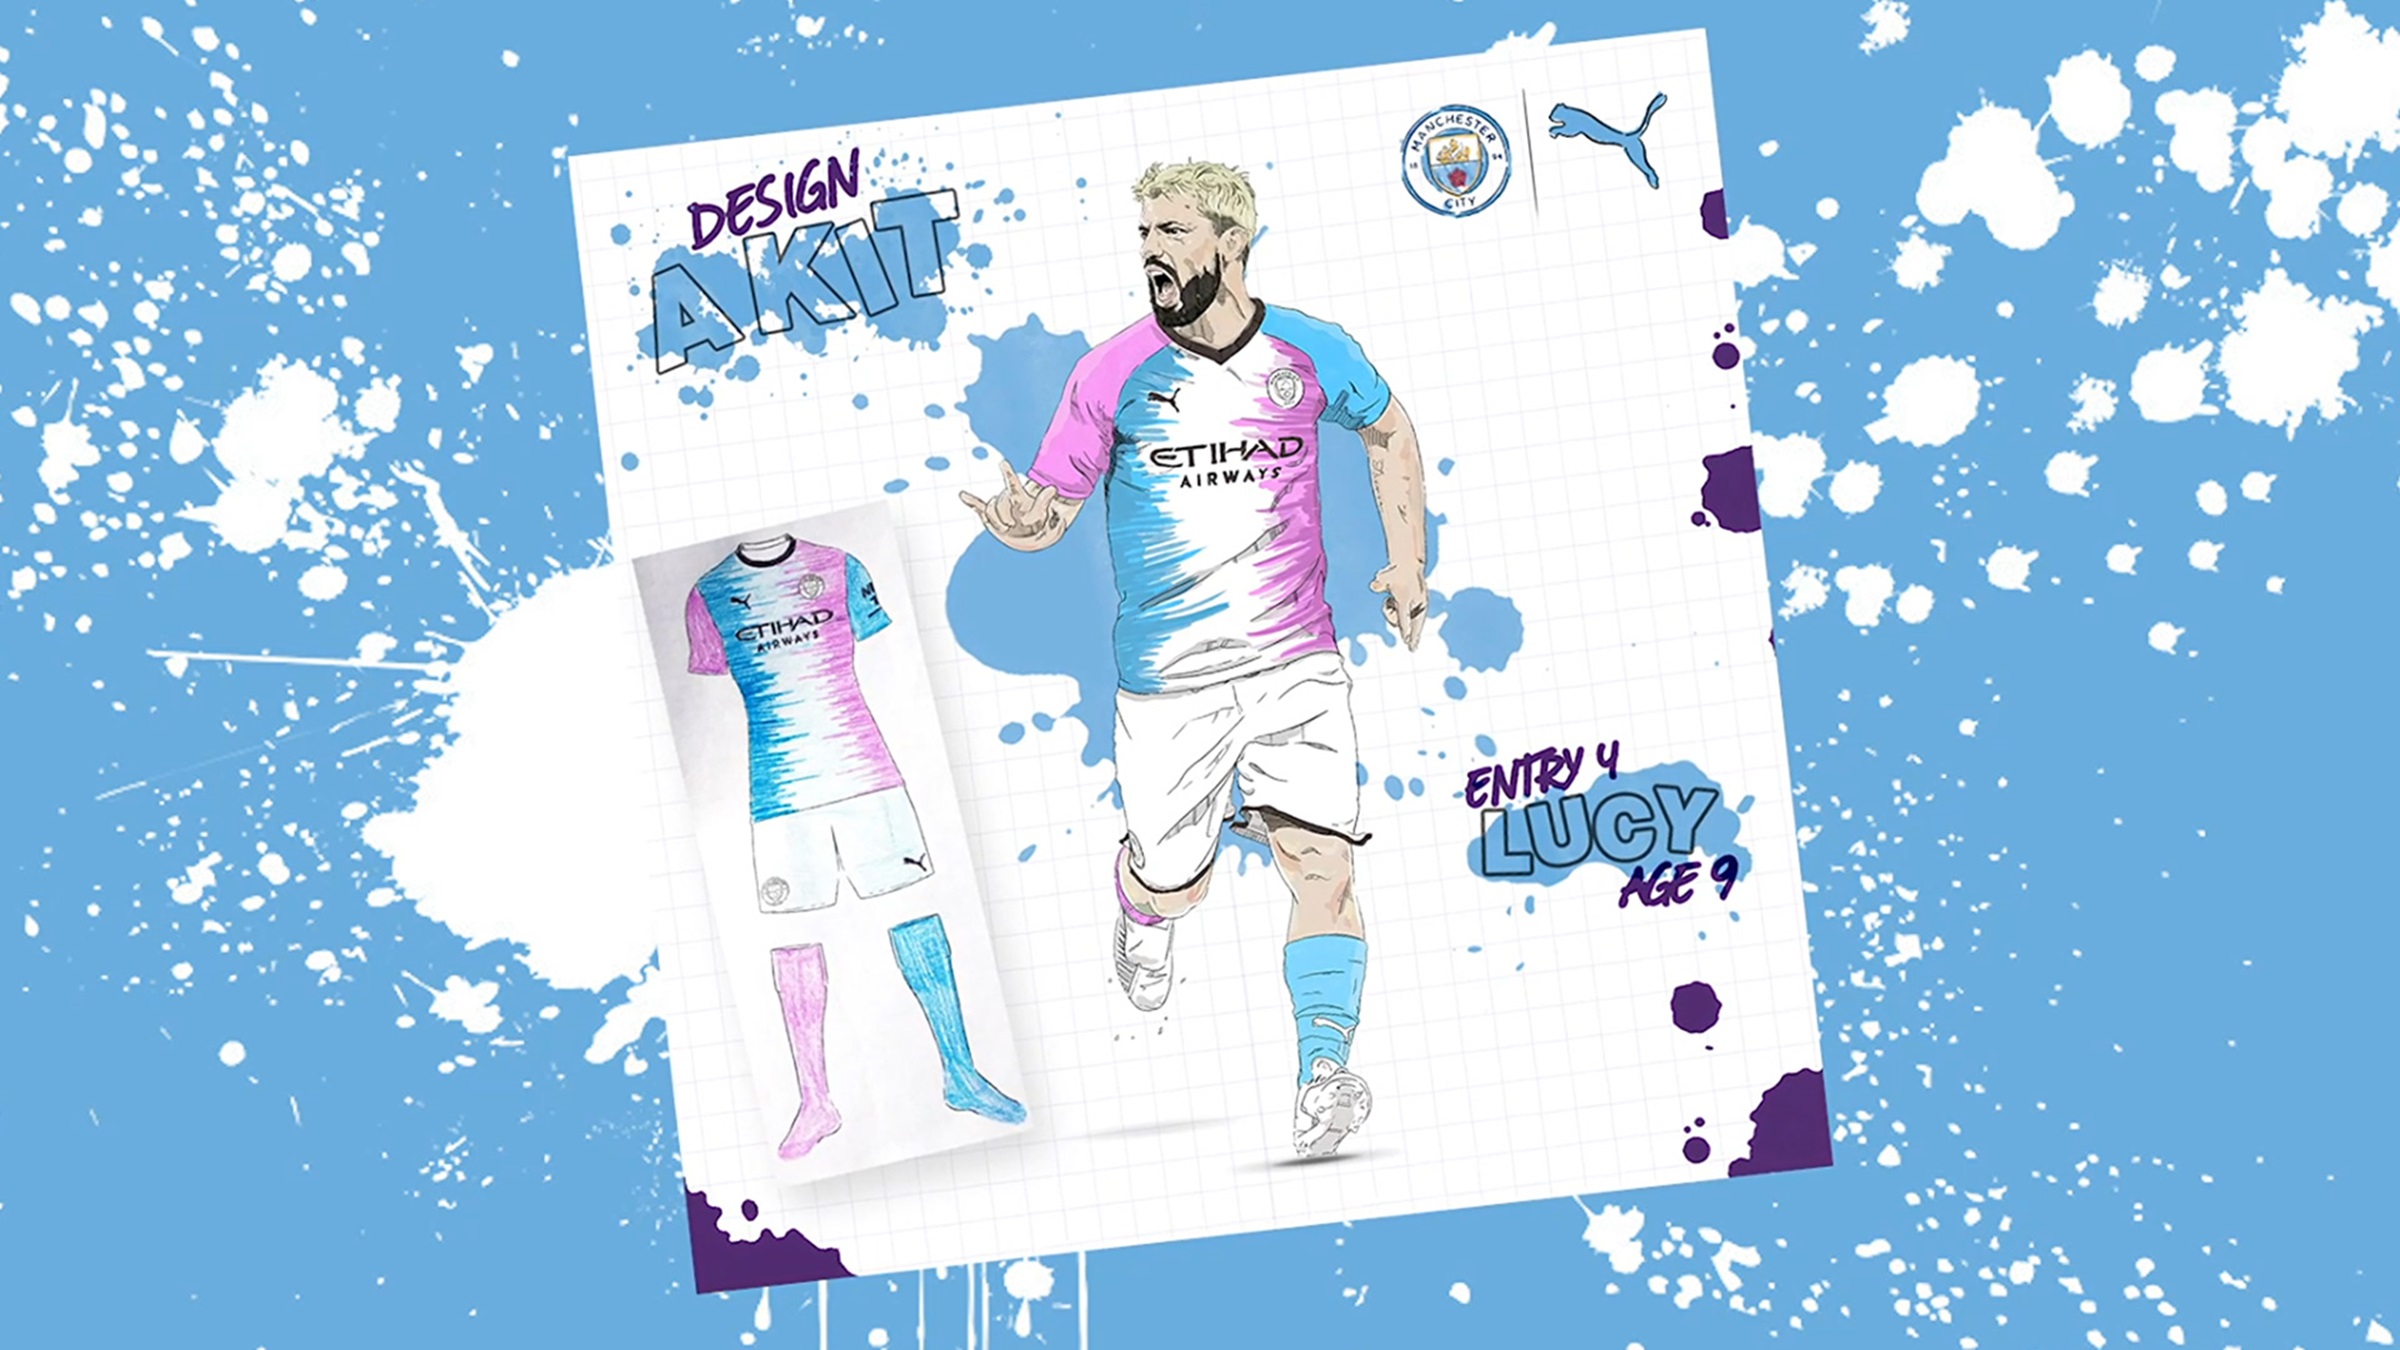 Agueor Manchester City Design Competition